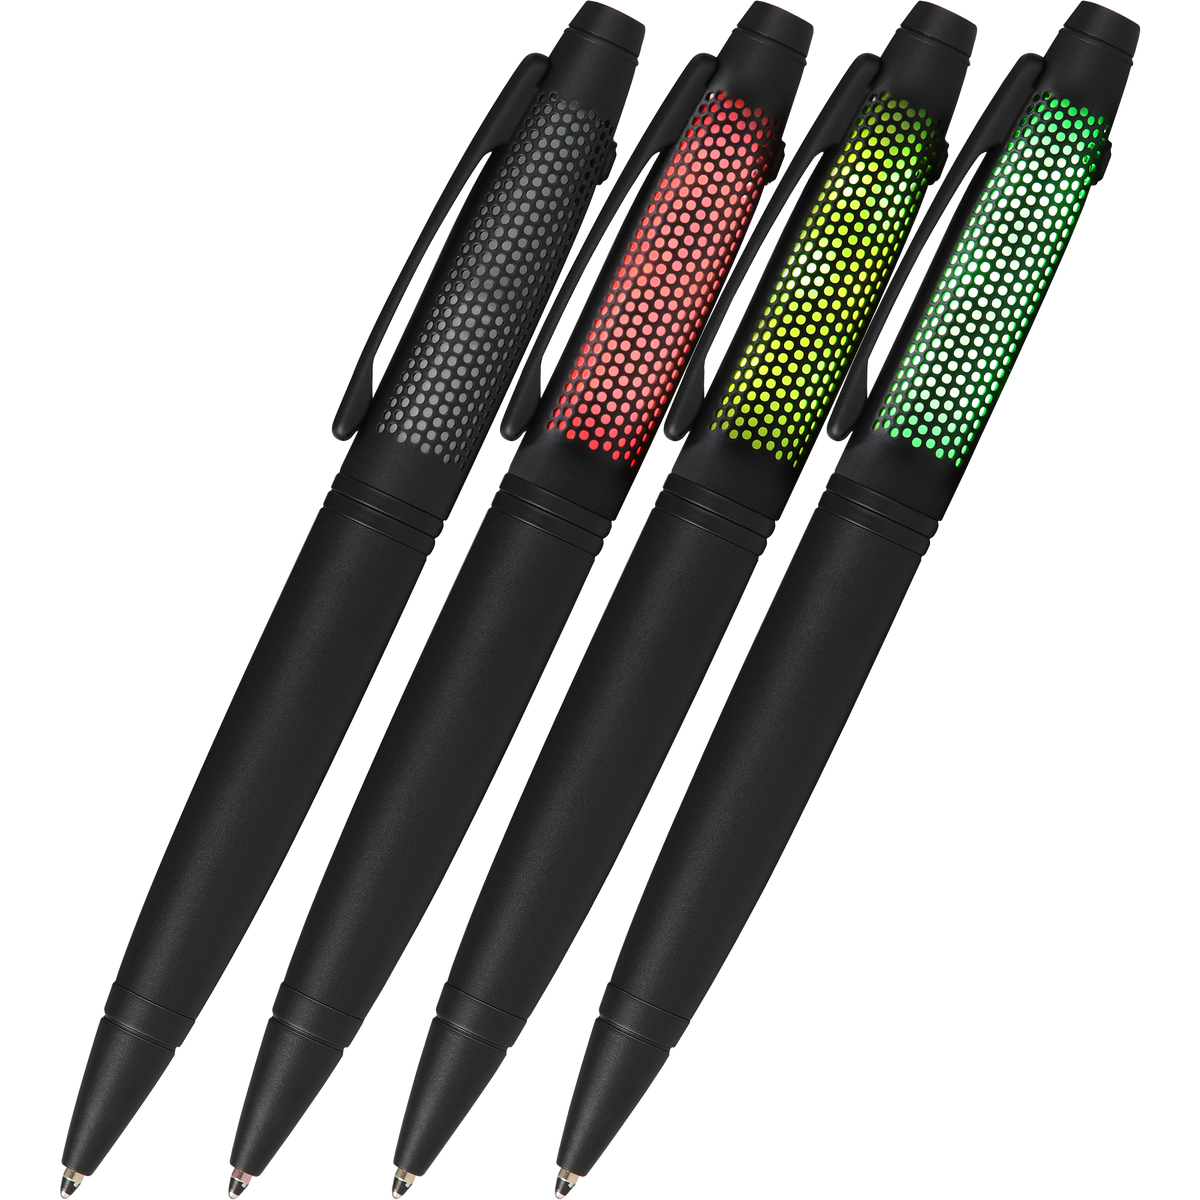 https://www.shoppenboutique.shop/wp-content/uploads/1692/66/all-our-valued-clients-will-get-a-fair-price-and-exceptional-customer-service-from-cross-lumina-ballpoint-pen-matte-black-cross-pens_0.png